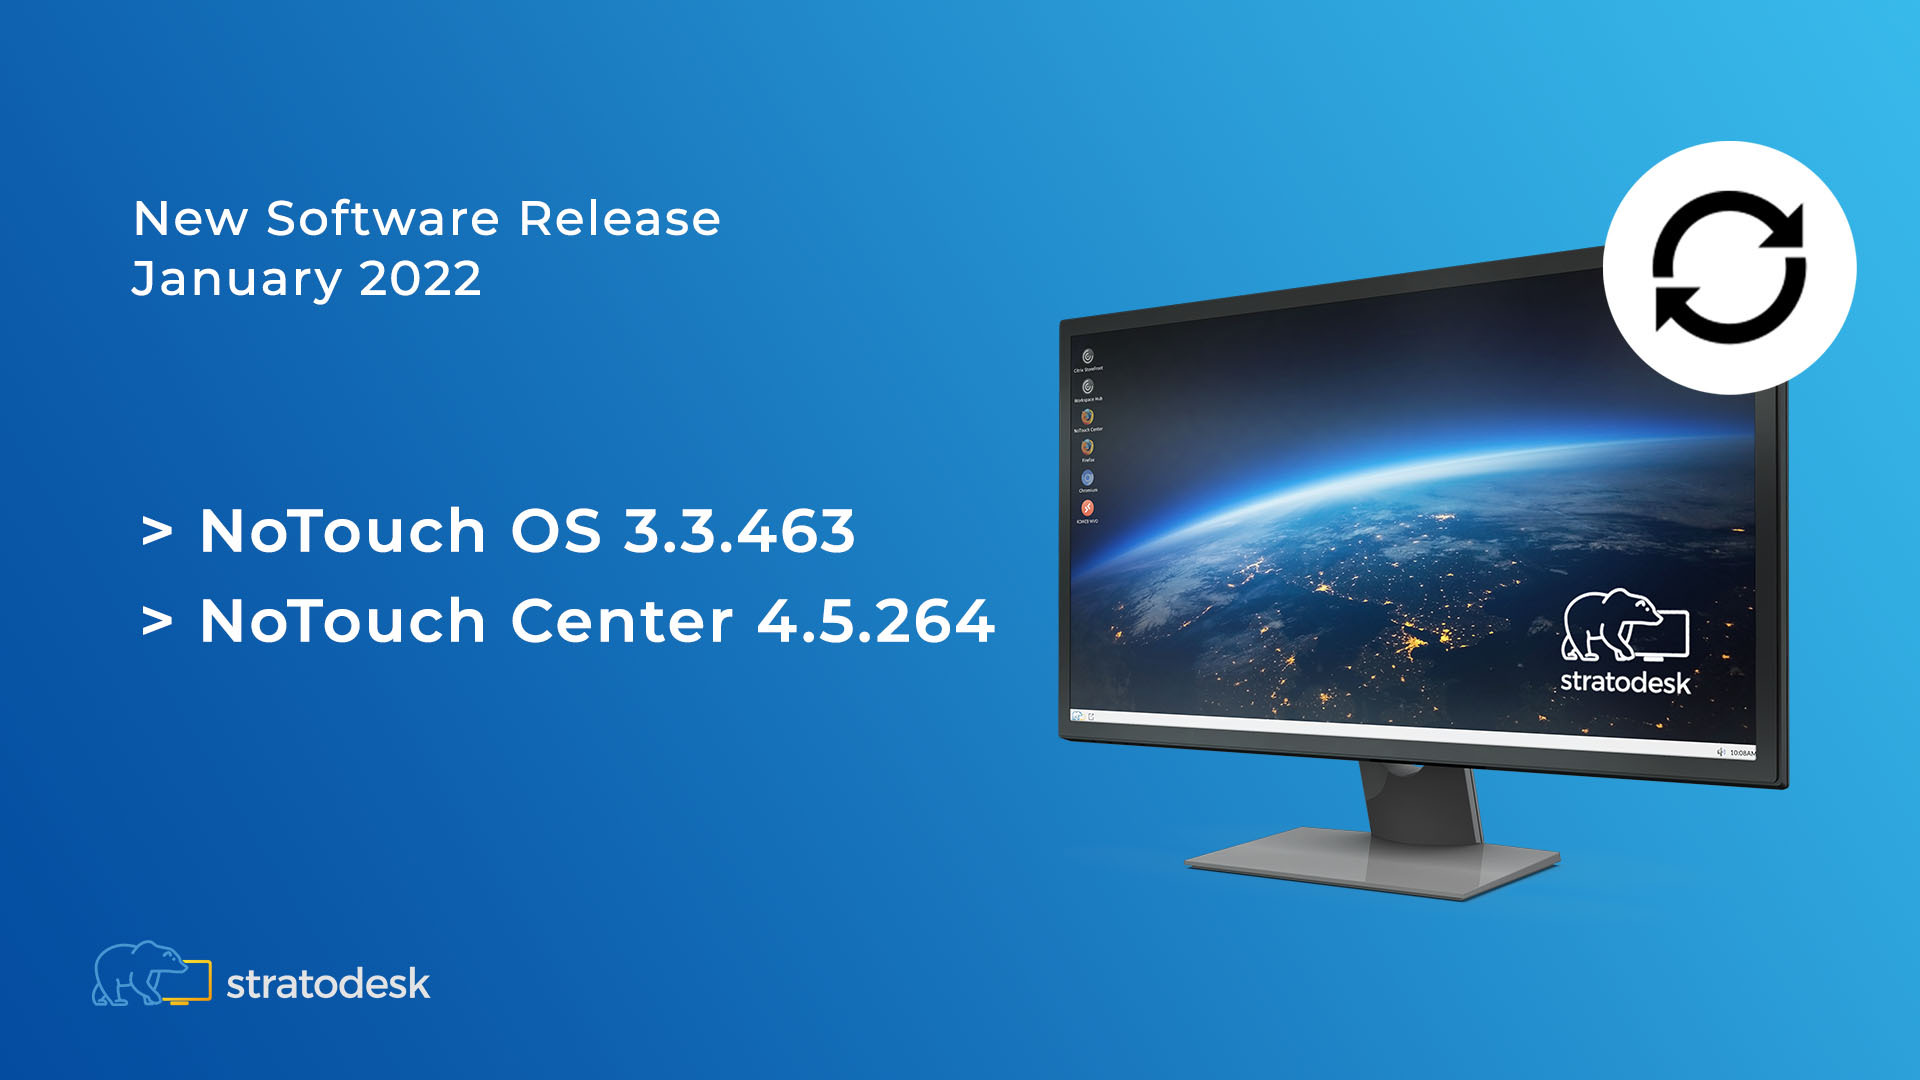 Introducing Stratodesk NoTouch OS 3.3.463 and NoTouch Center 4.5.264